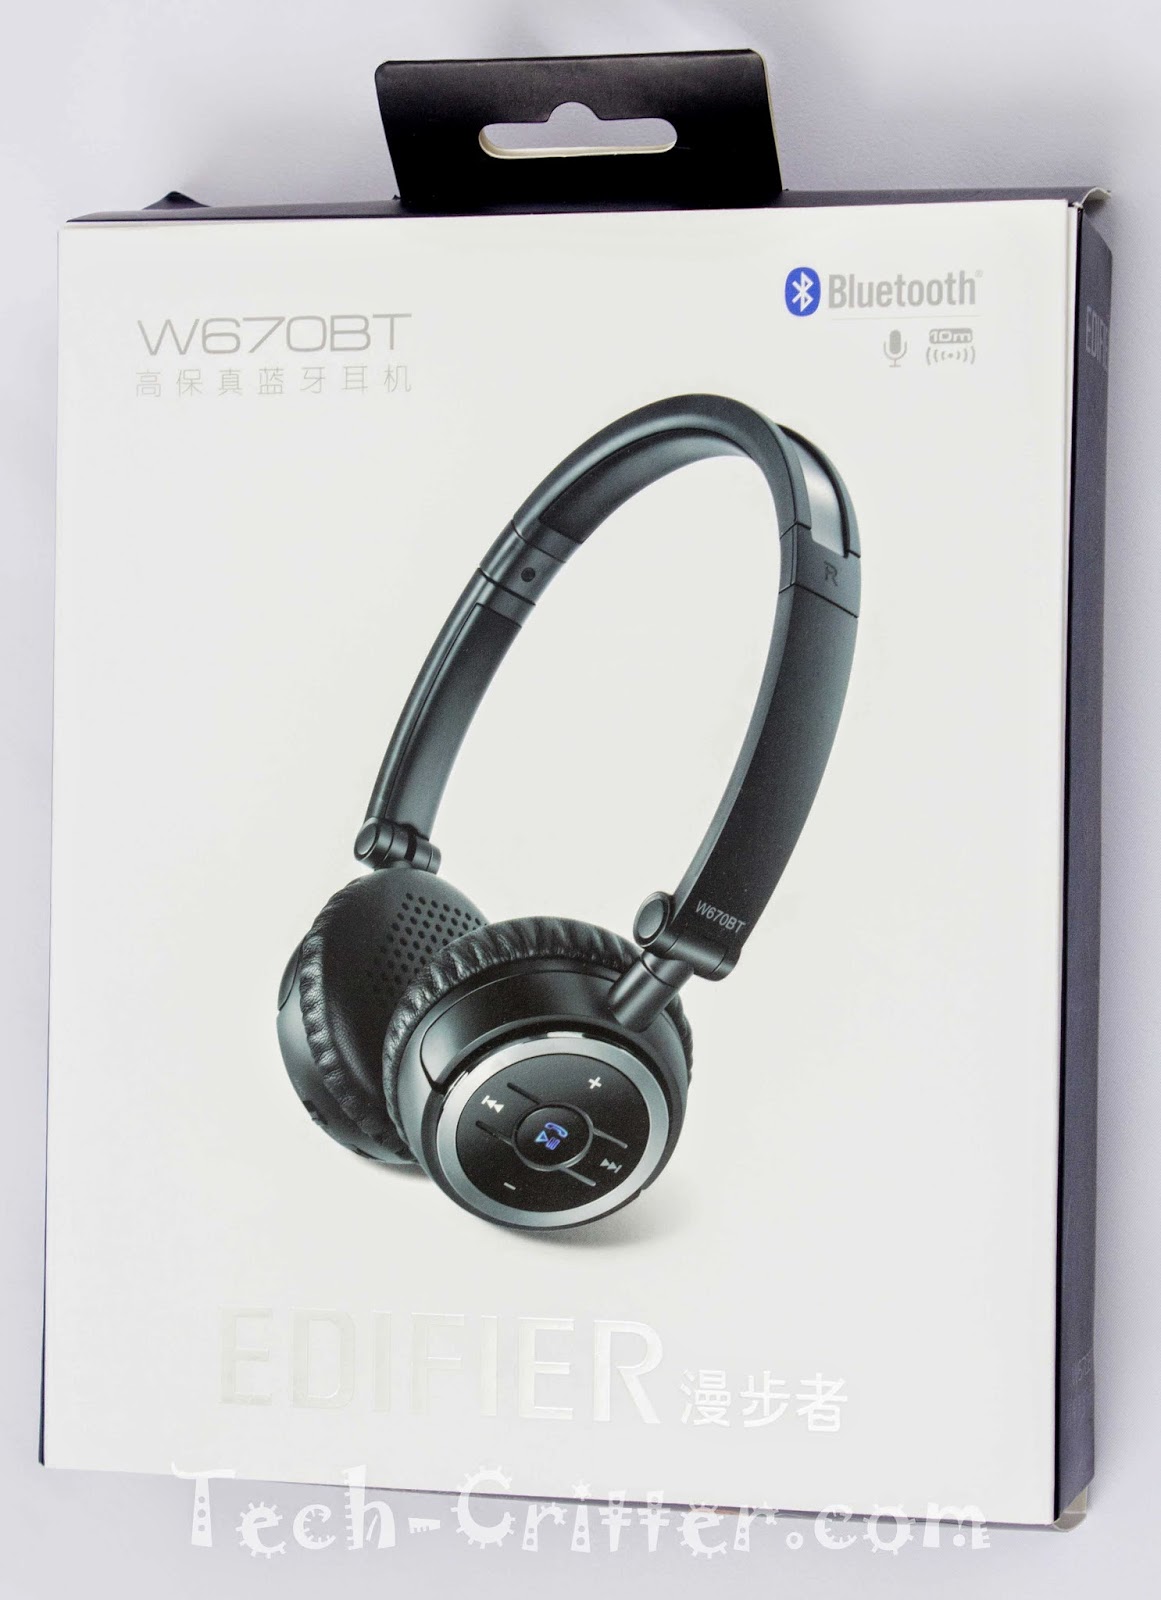 Unboxing & Review: Edifier W670BT Stereo Bluetooth Headset 36